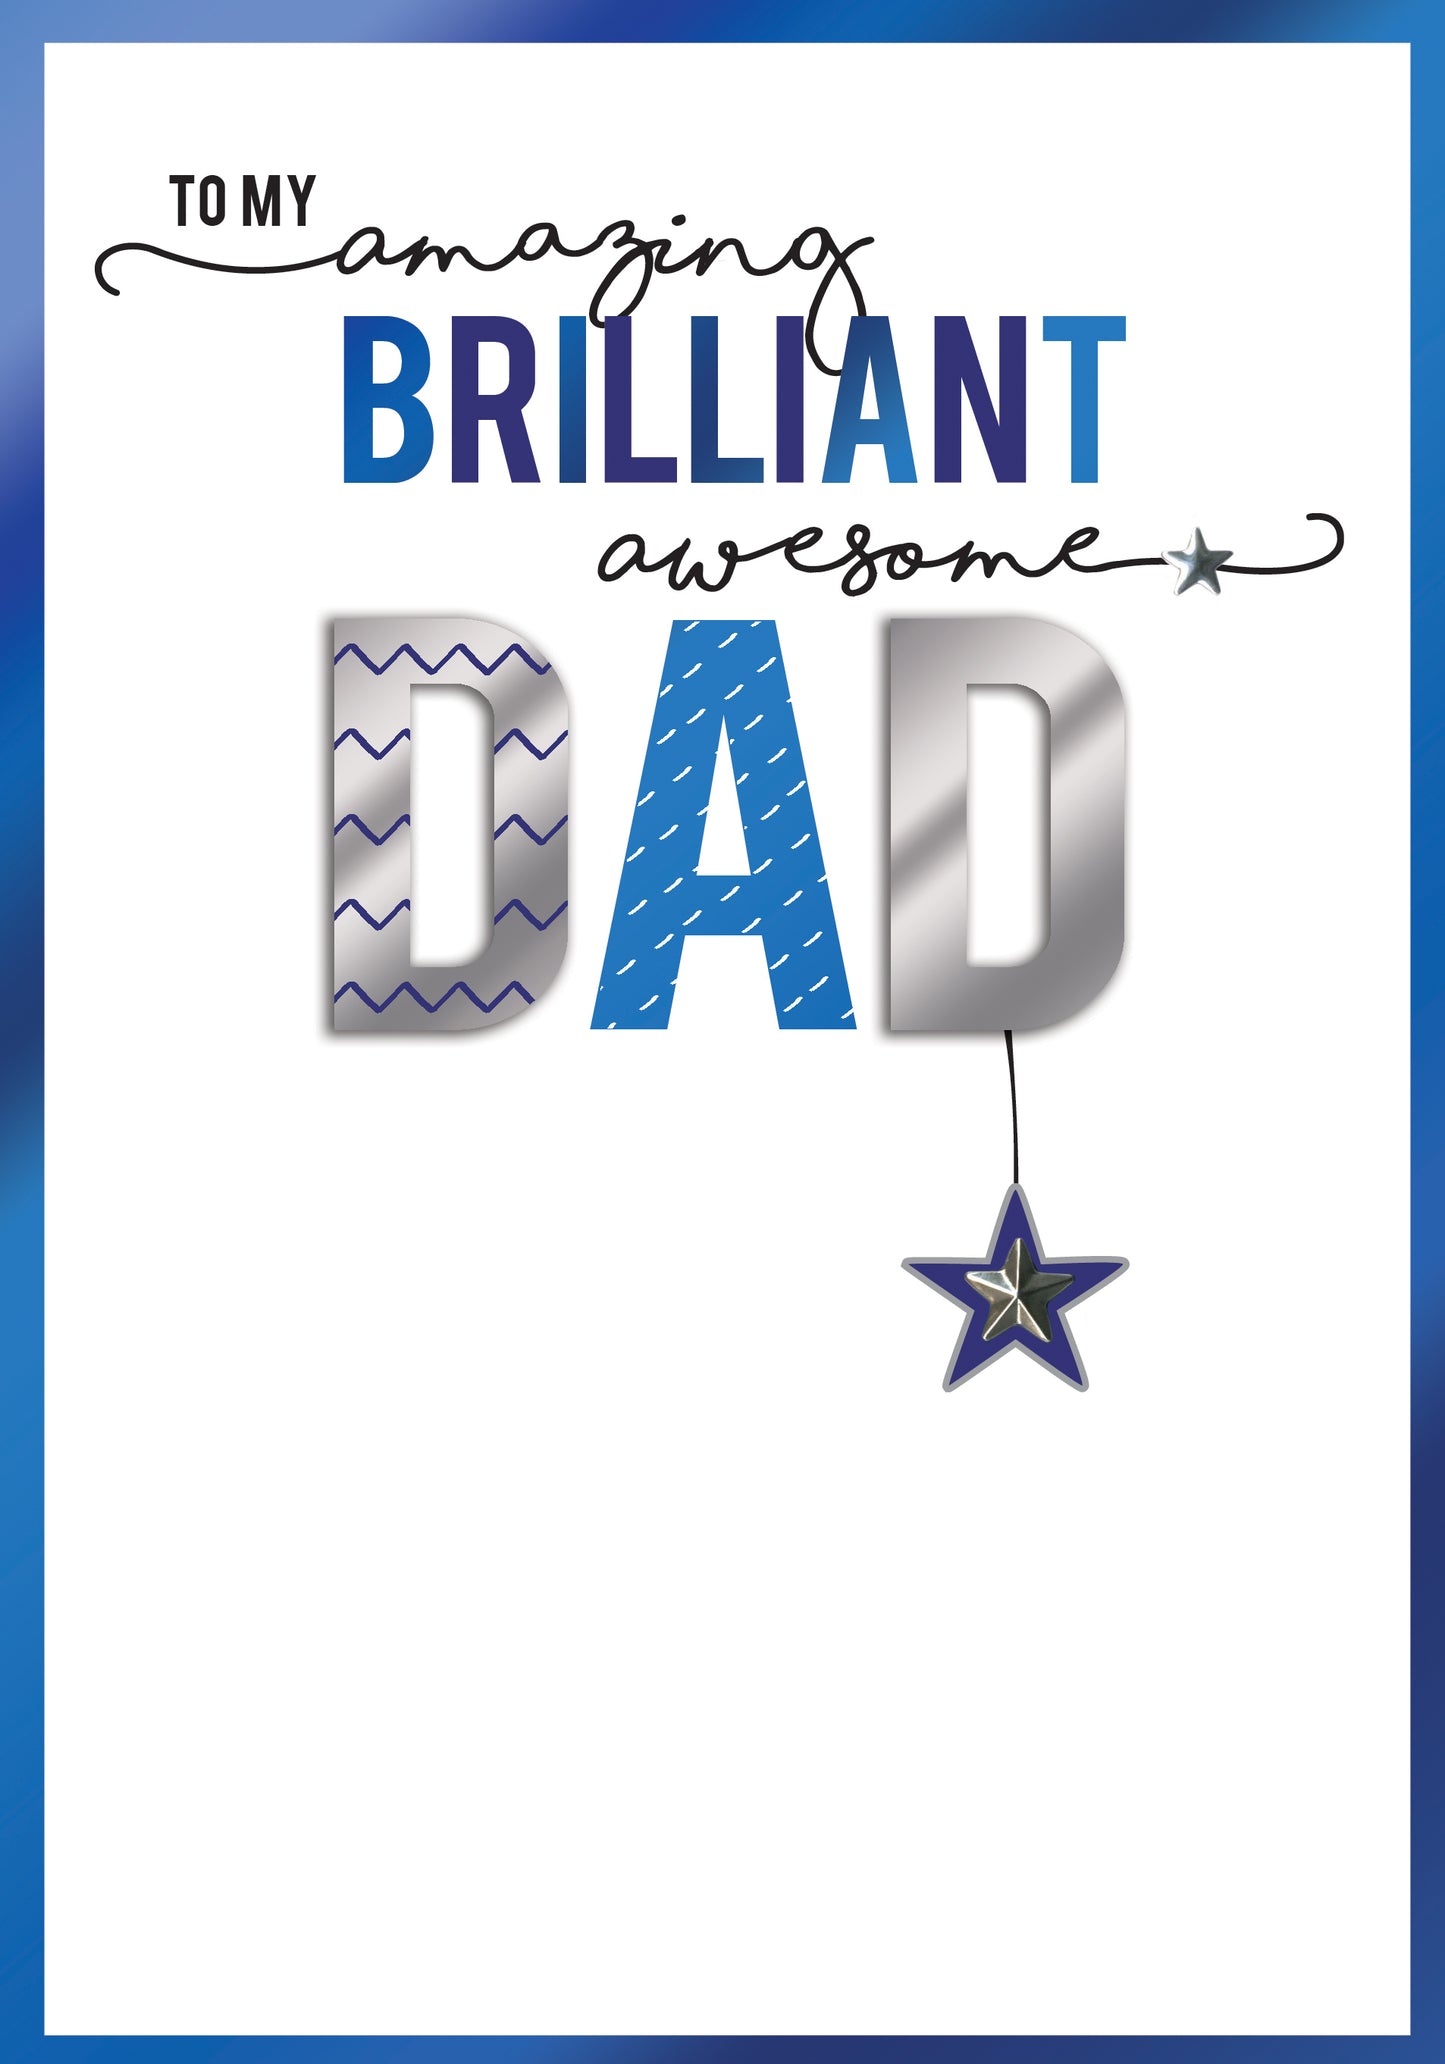 Amazing Brilliant Awesome Dad Embellished Father's Day Card